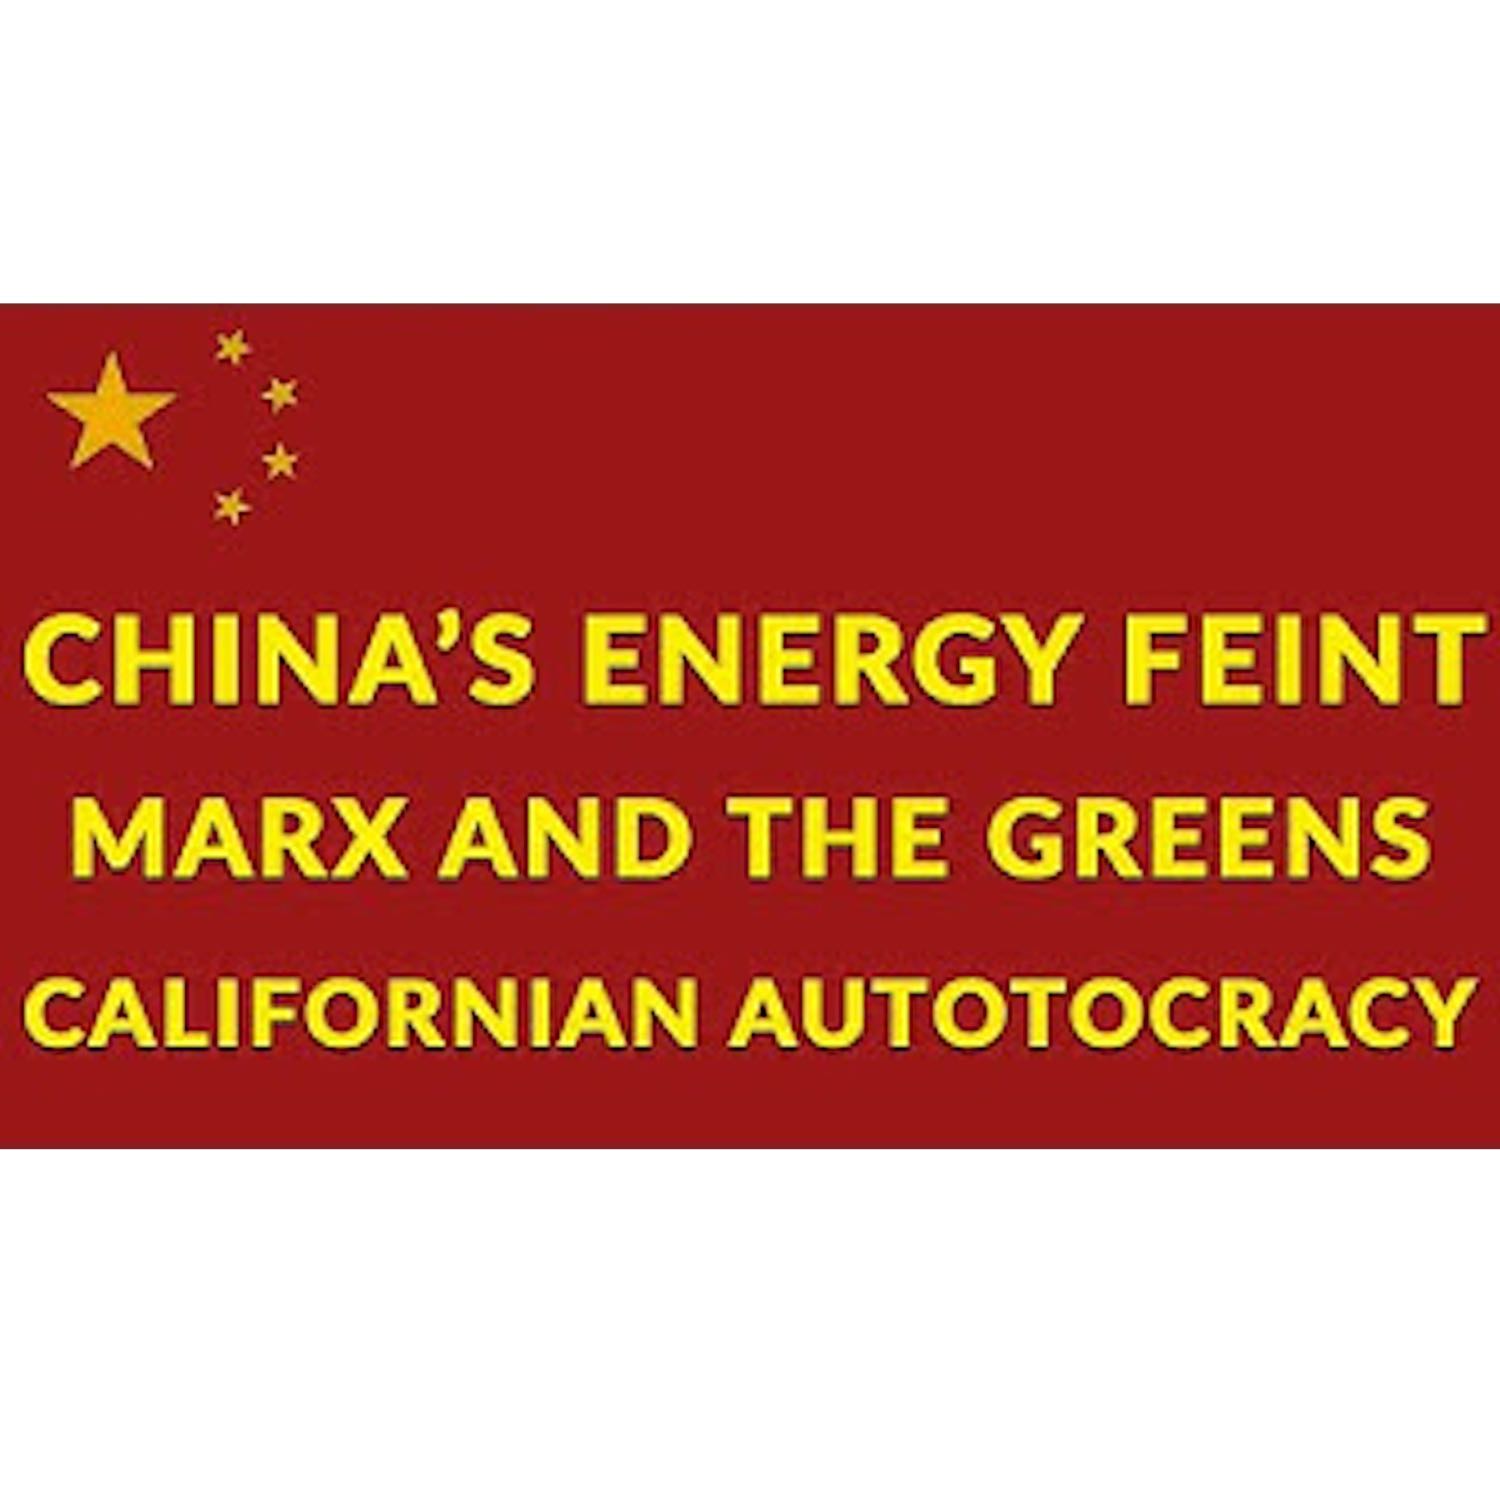 When Green Met Red. China, Karl Marx, and Green Energy.